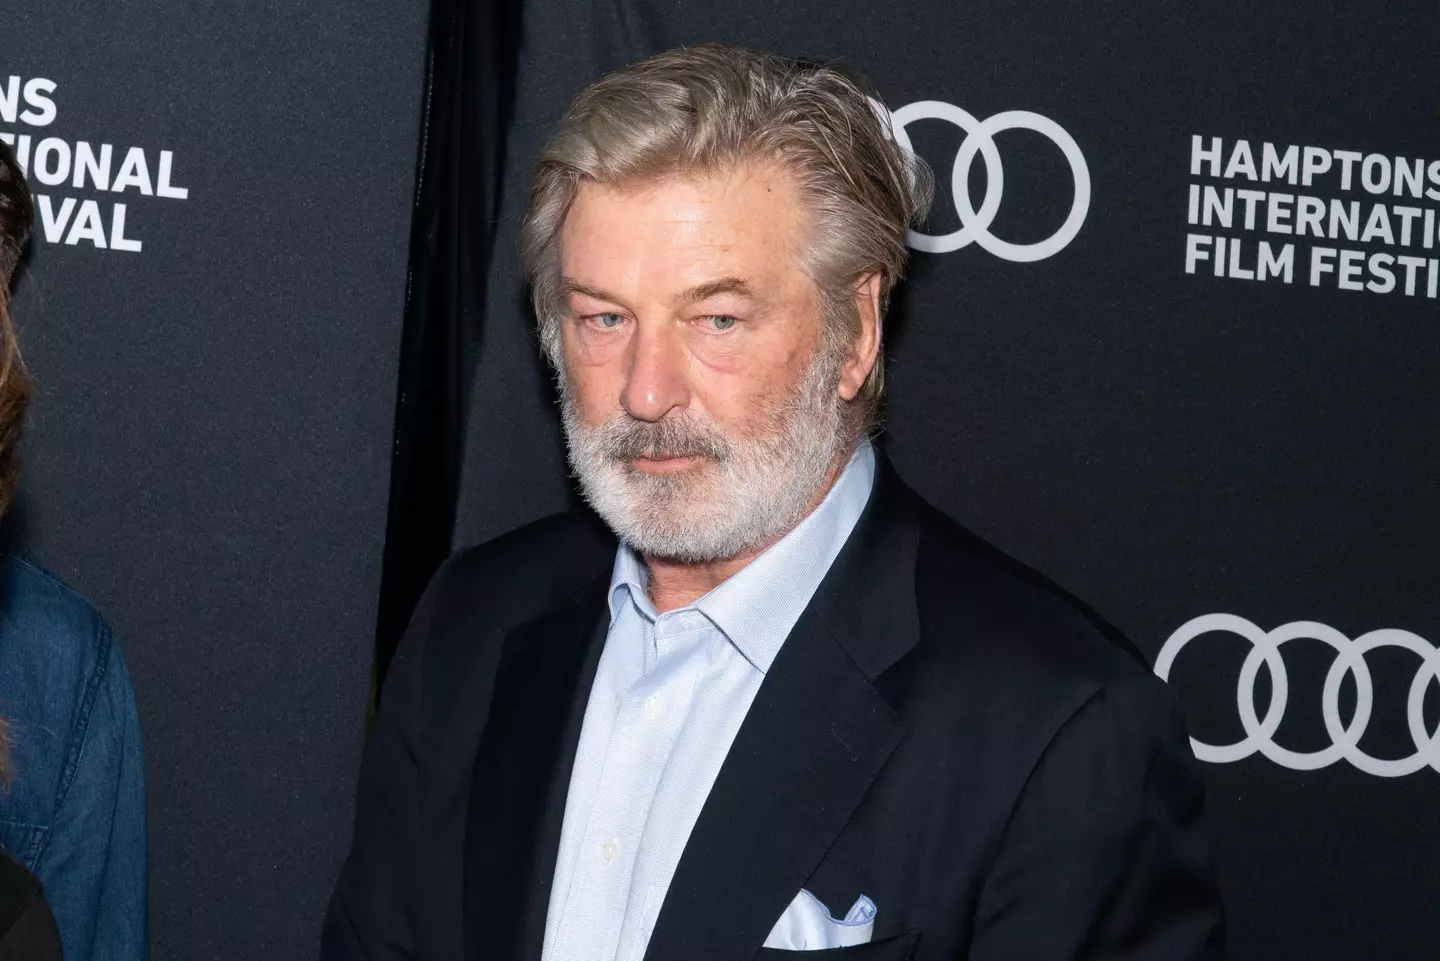 Alec Baldwin believes he won't be facing criminal charges.